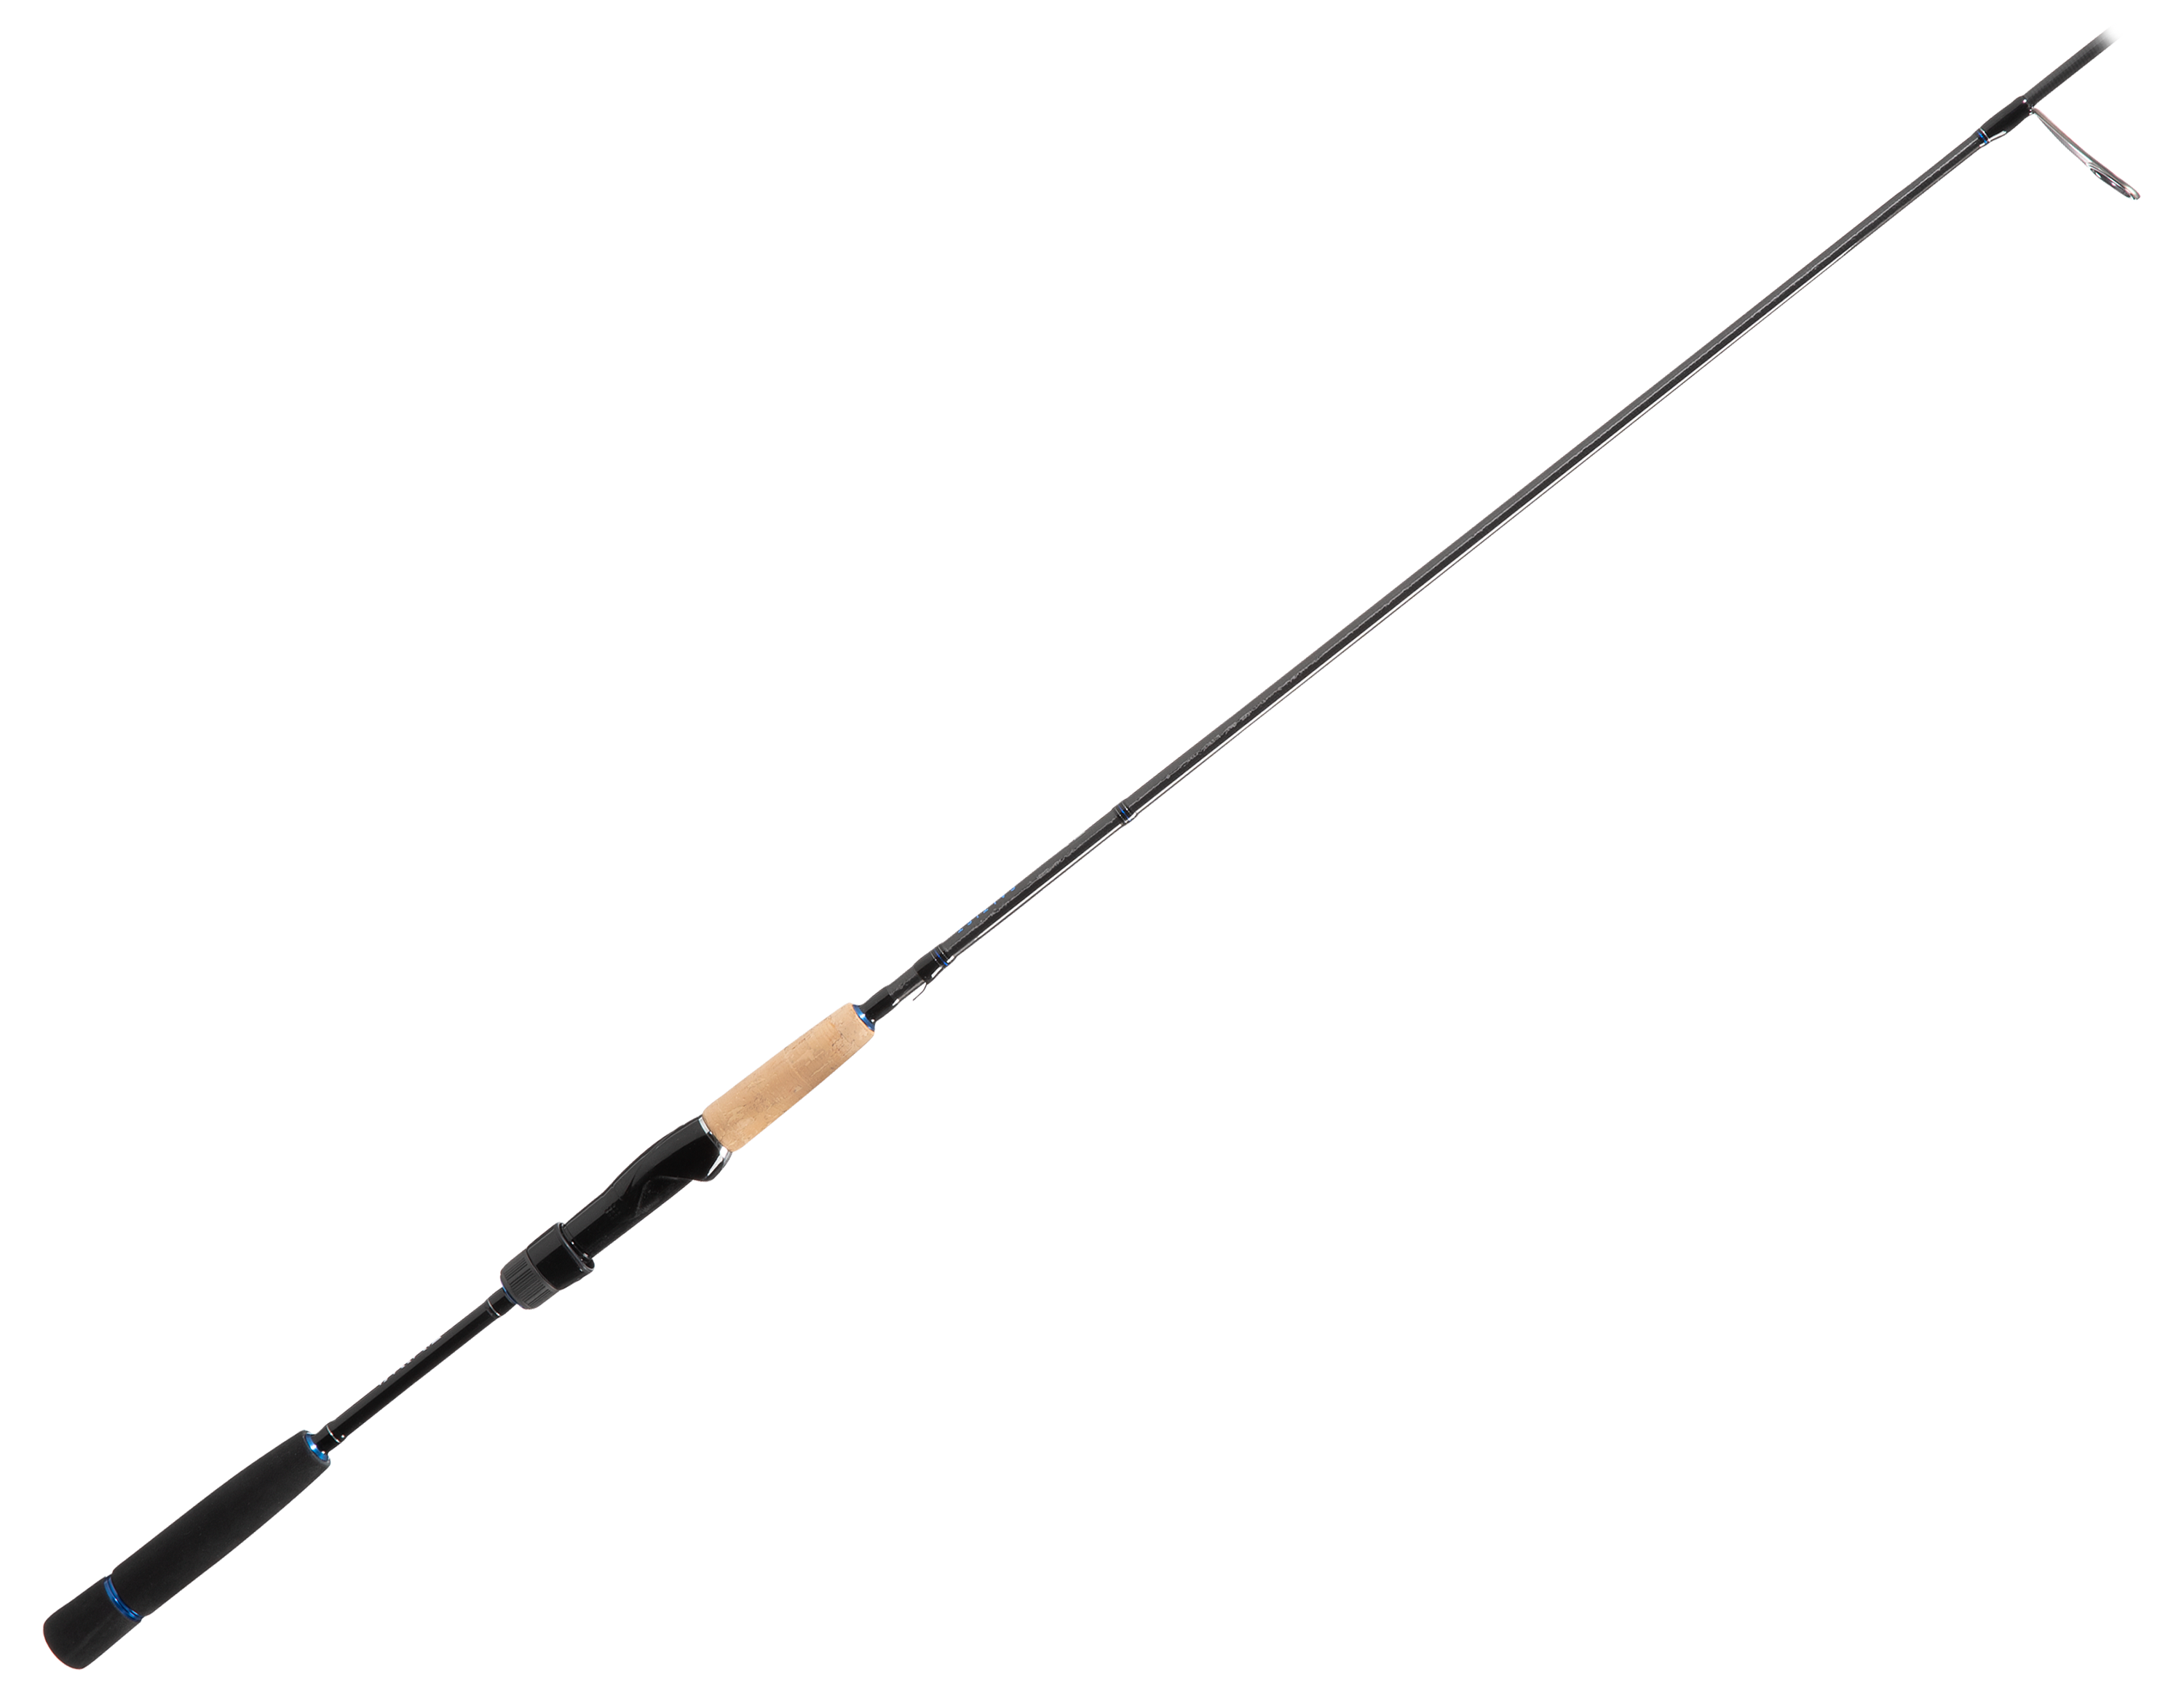 Saltwater Spinning Rods - Go Salmon Fishing